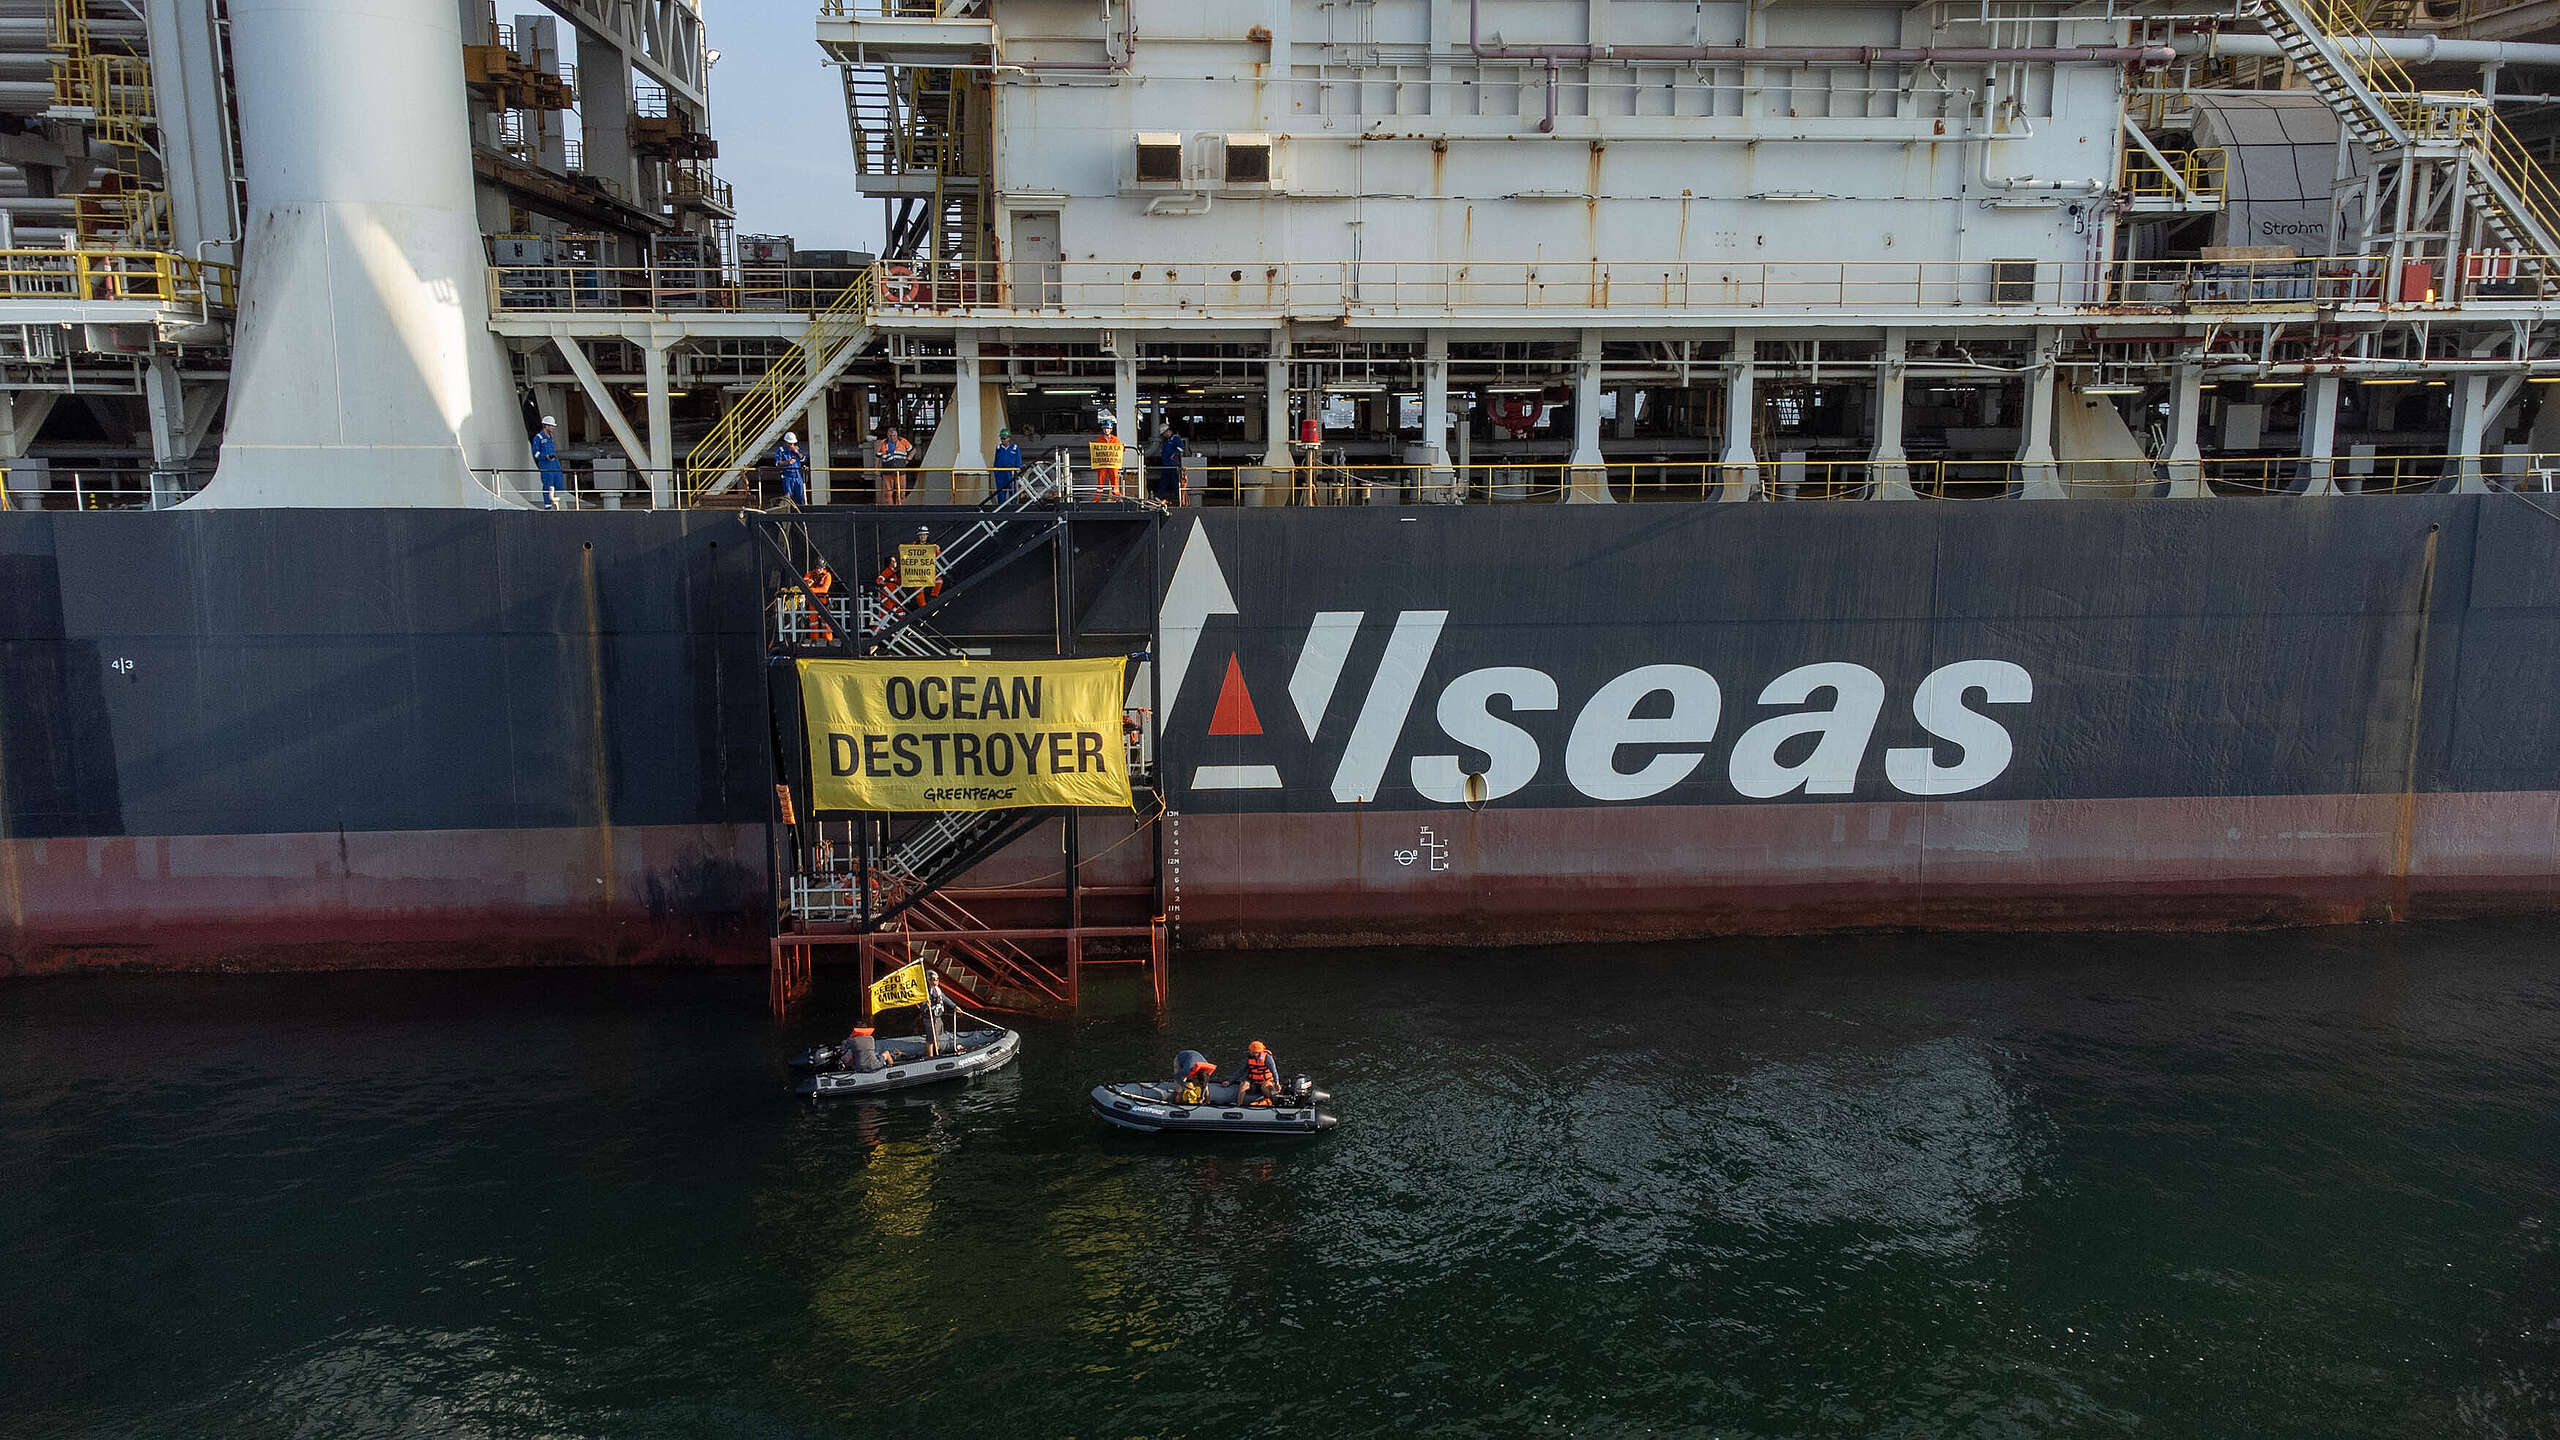 Activist in small boats hold up yellow banner in front of mining ship